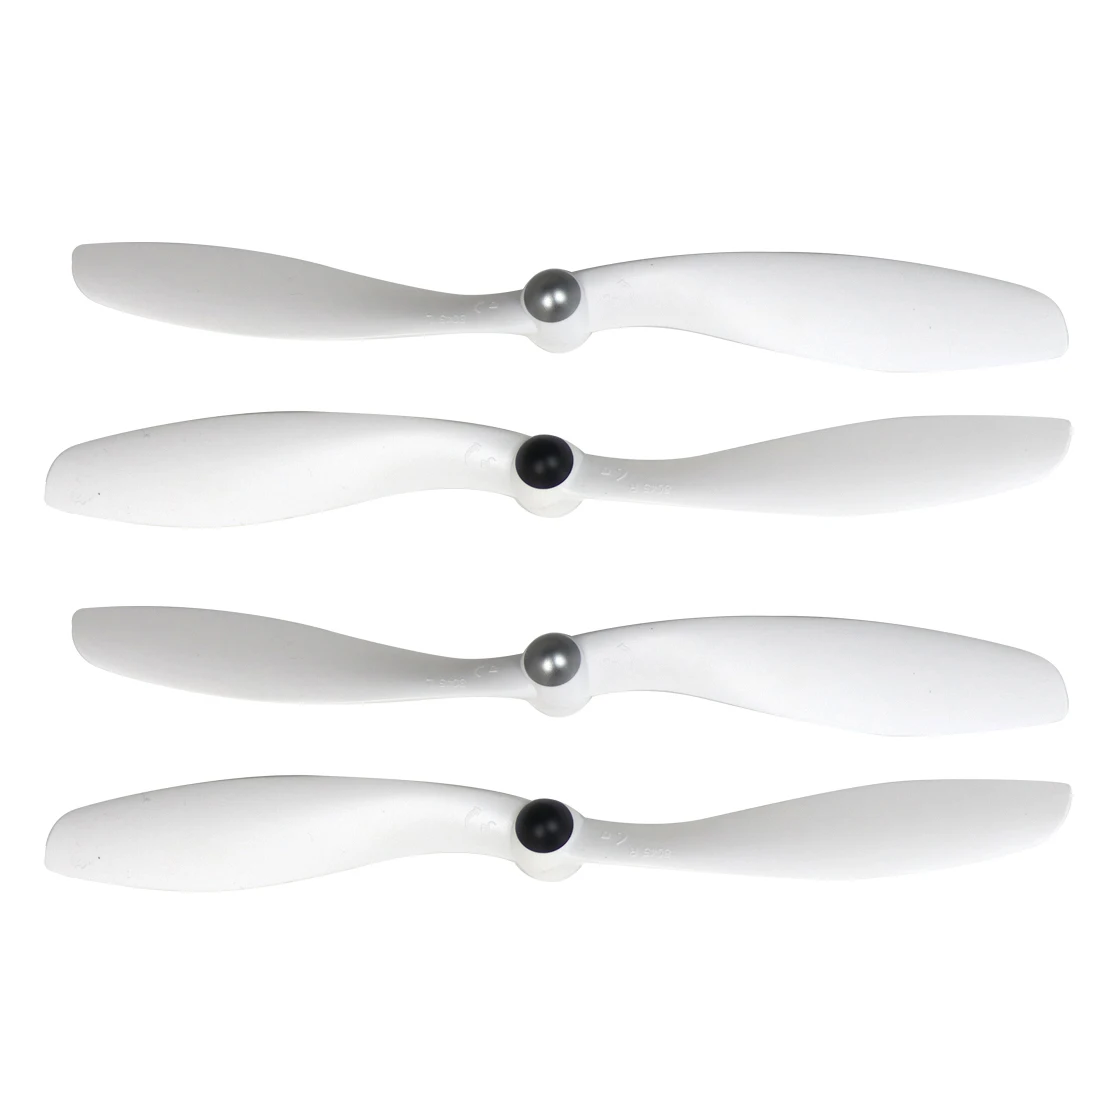 2 Pair 8x4.5 8045 CW CCW Propeller Props For F330 F450 frame 2212 self-locking motor RC FPV Multi-Copter QuadCopter 